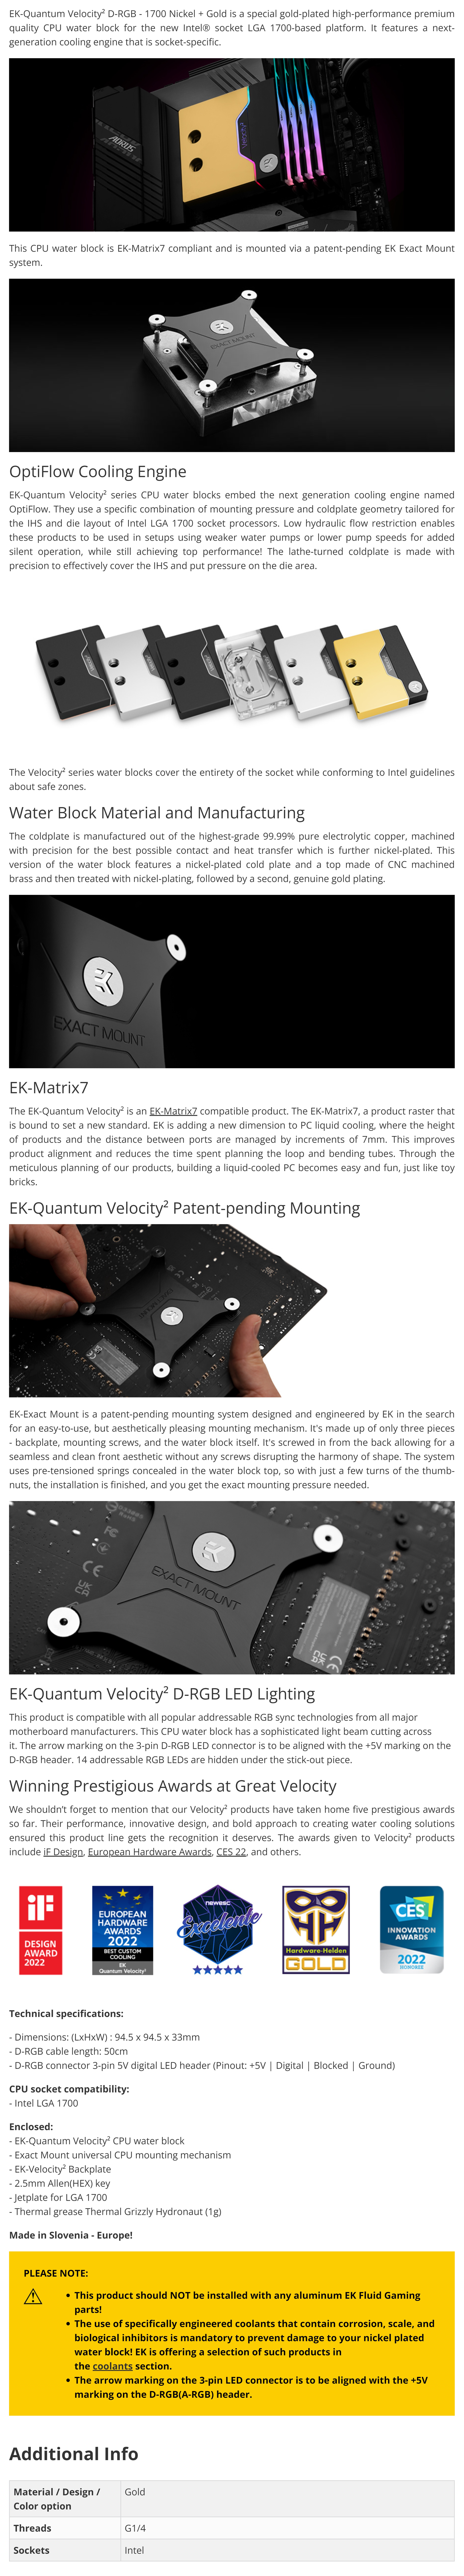 A large marketing image providing additional information about the product EK Quantum Velocity2 D-RGB AM4 Nickel/Gold CPU Waterblock - Additional alt info not provided